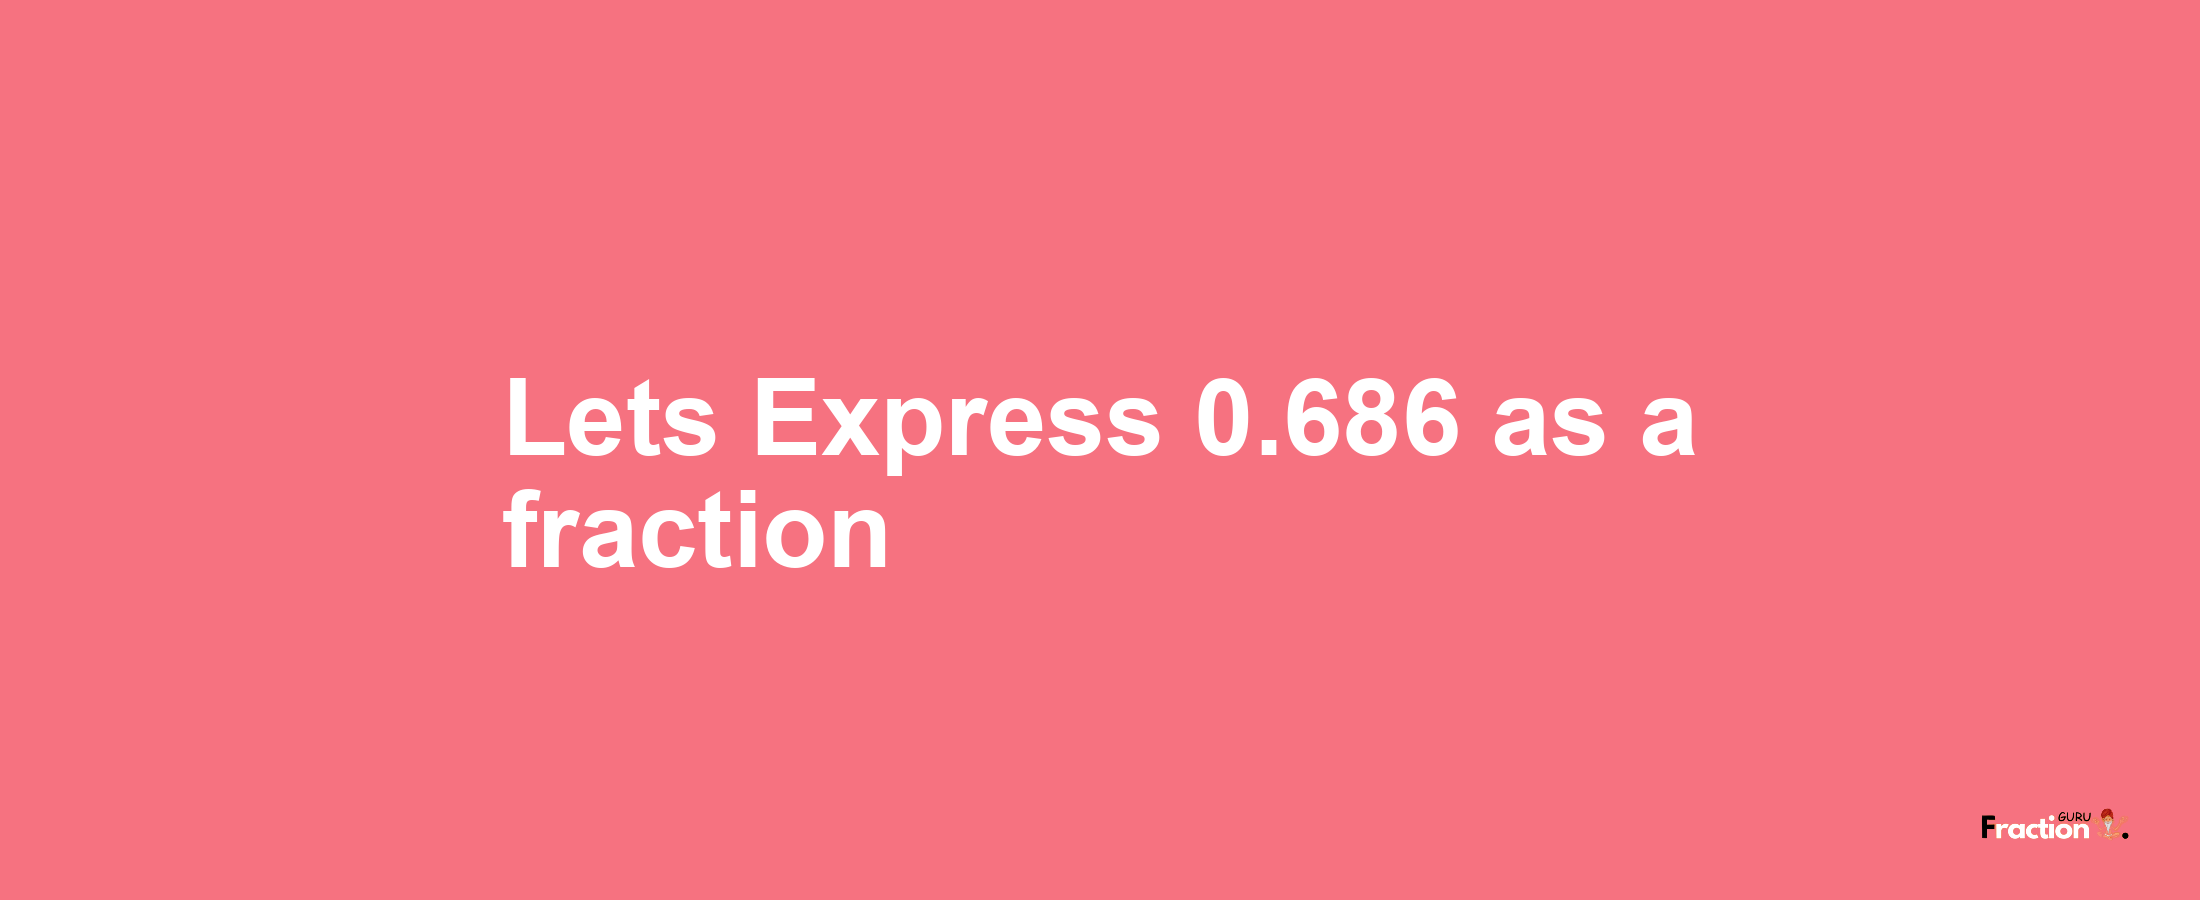 Lets Express 0.686 as afraction